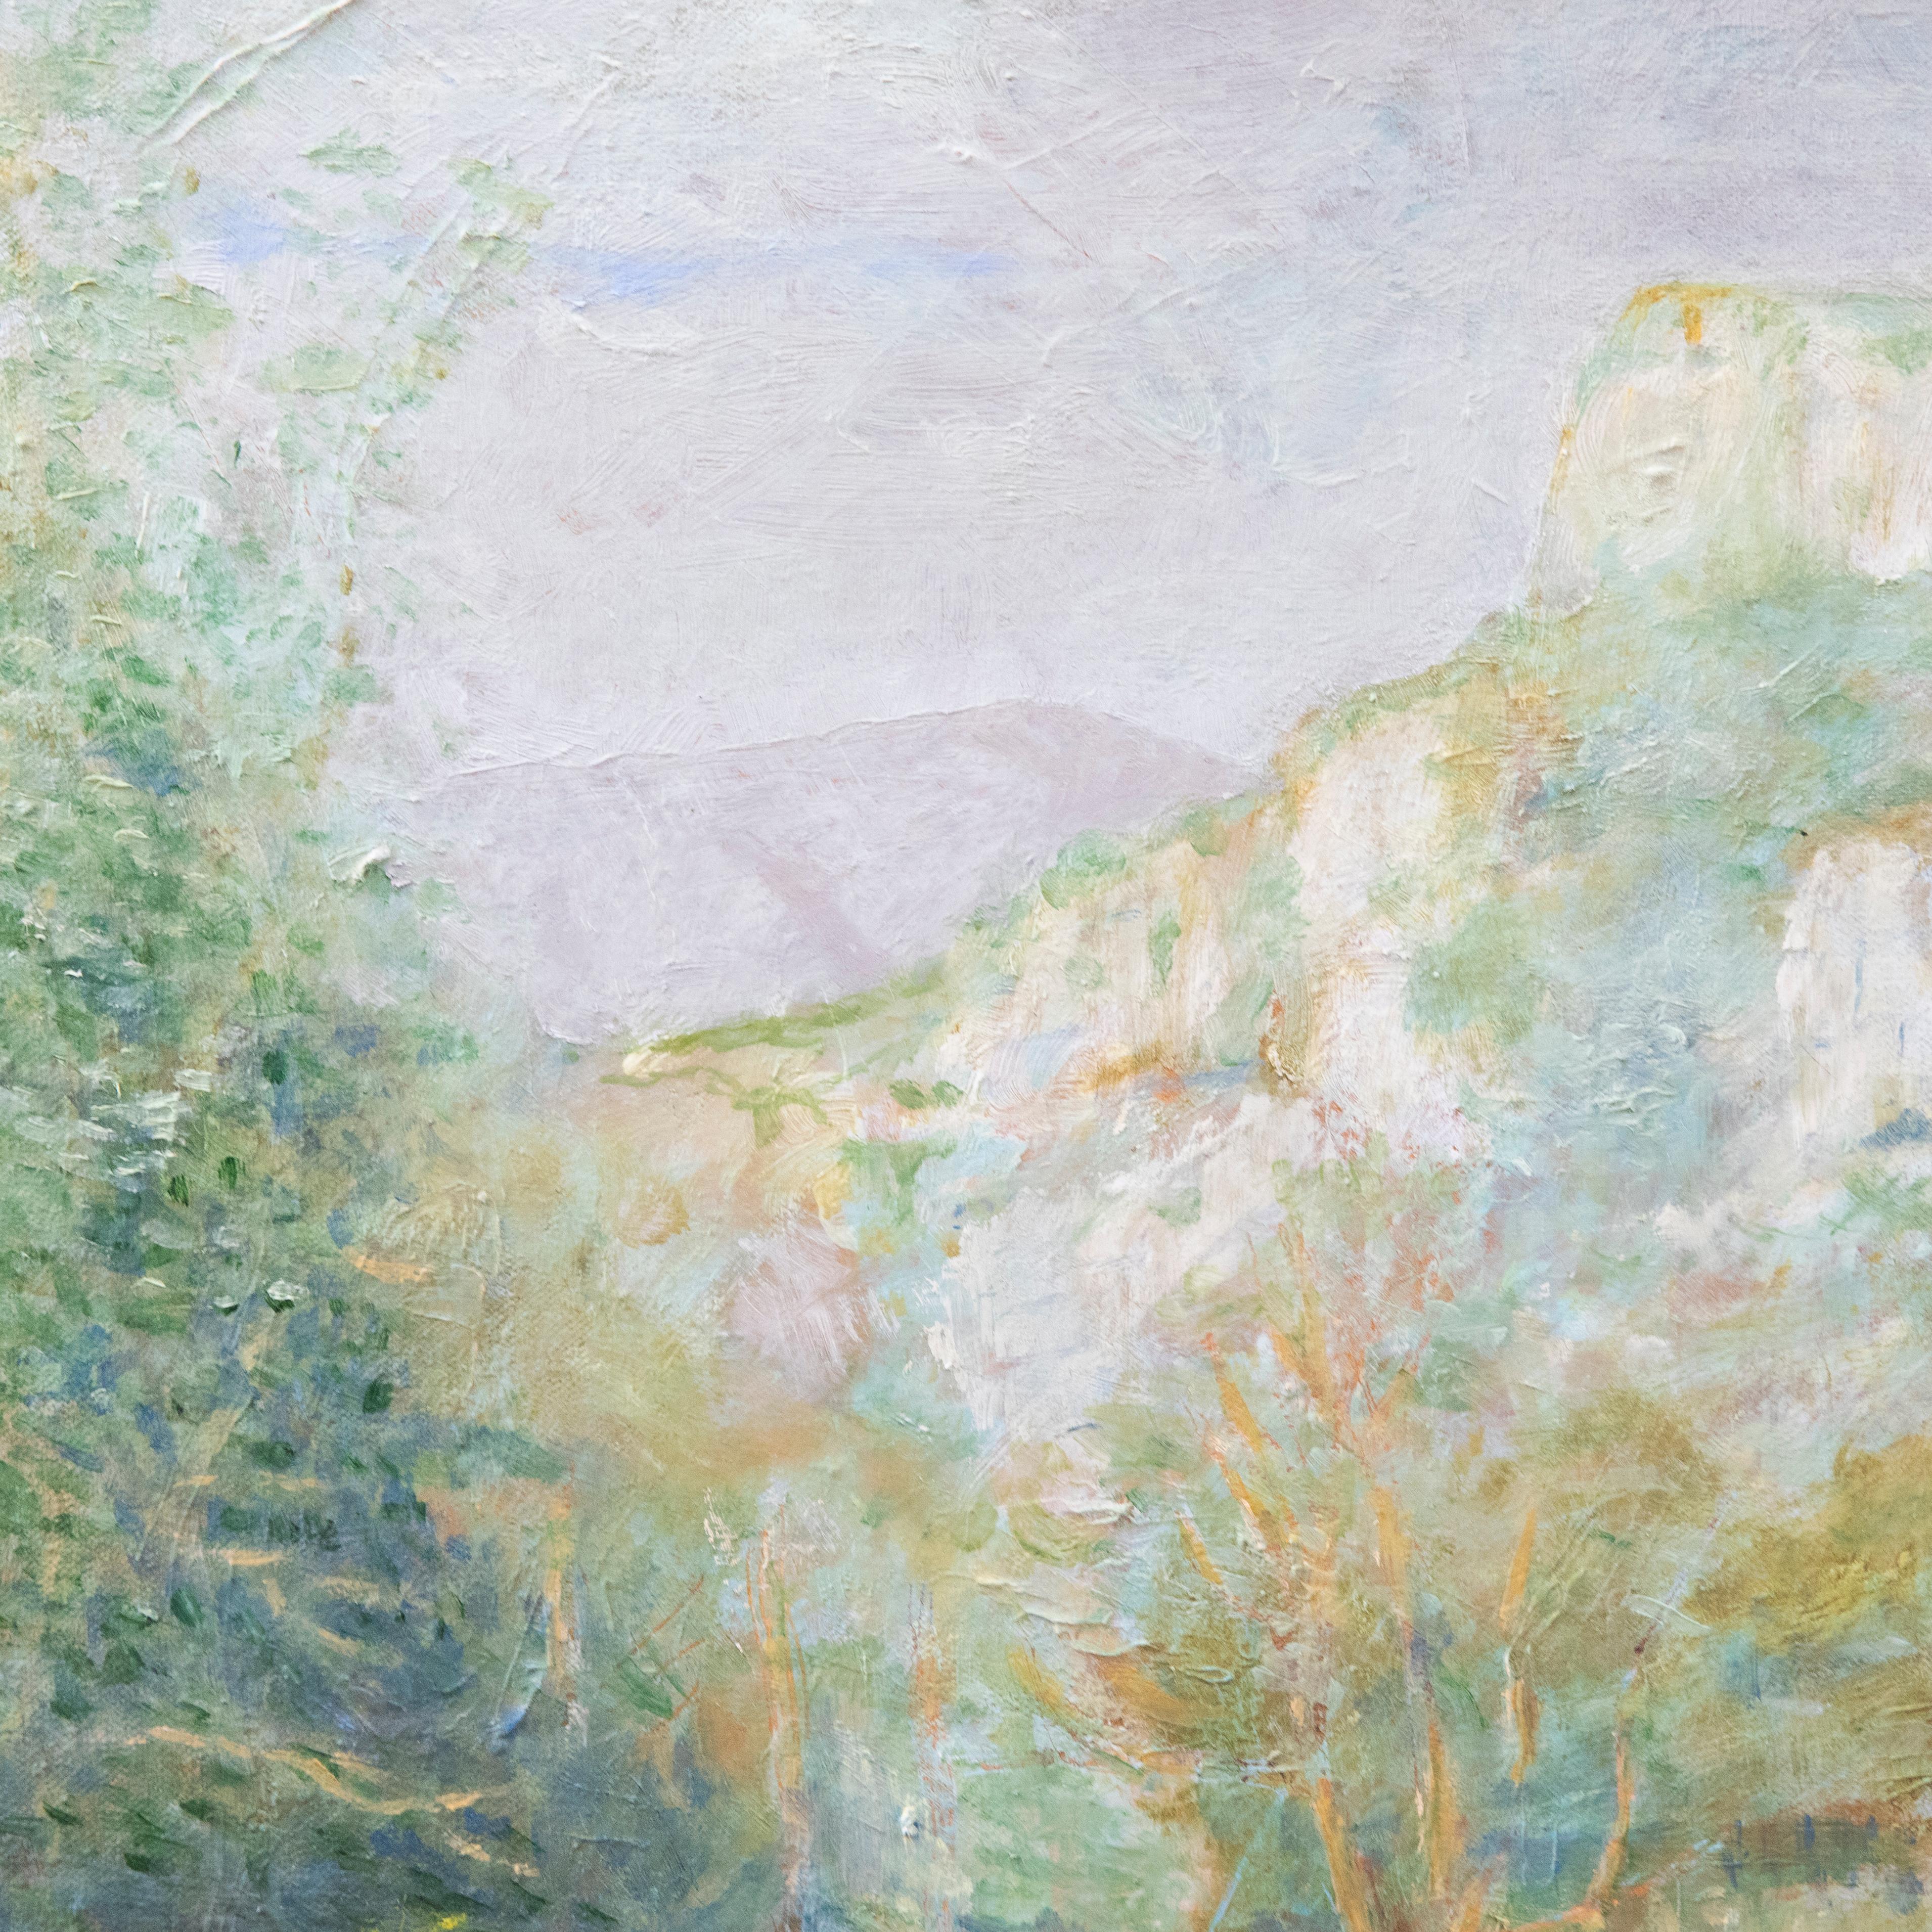 A charming oil study of a valley running through a mountainous landscape in an impressionist style. Unsigned. On canvas.
